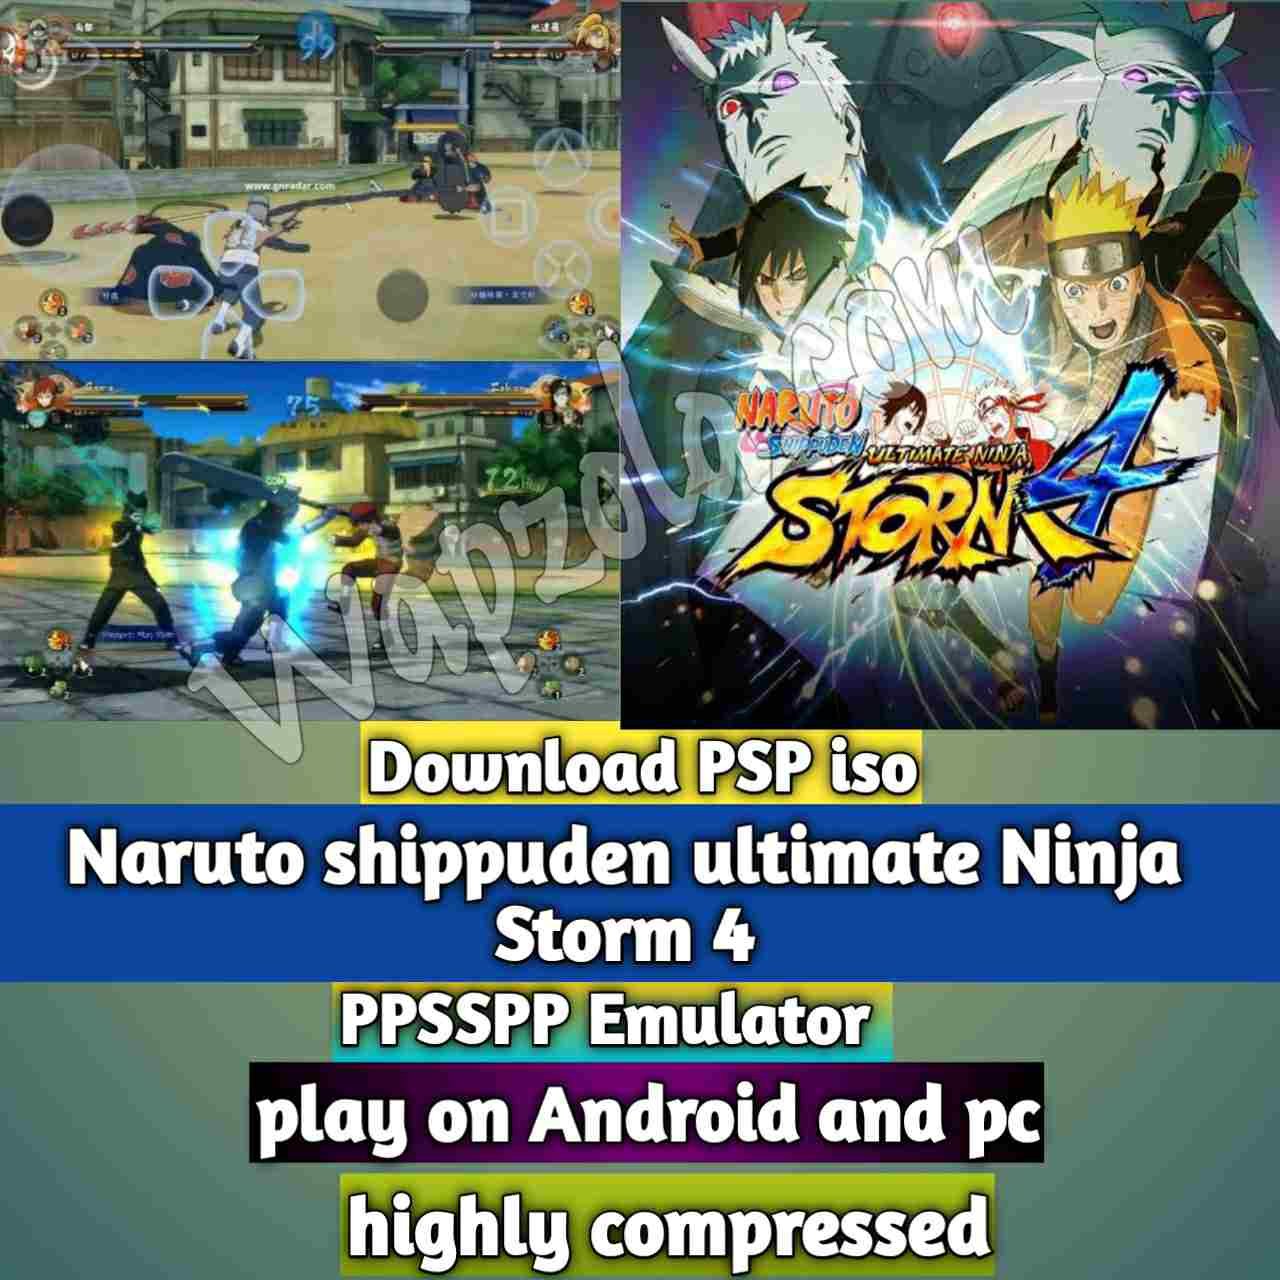 You are currently viewing [Télécharger] Naruto shippuden ultimate Ninja Storm 4 Mod iso ppsspp emulator – PSP APK Iso Rom hautement compressé 800MB